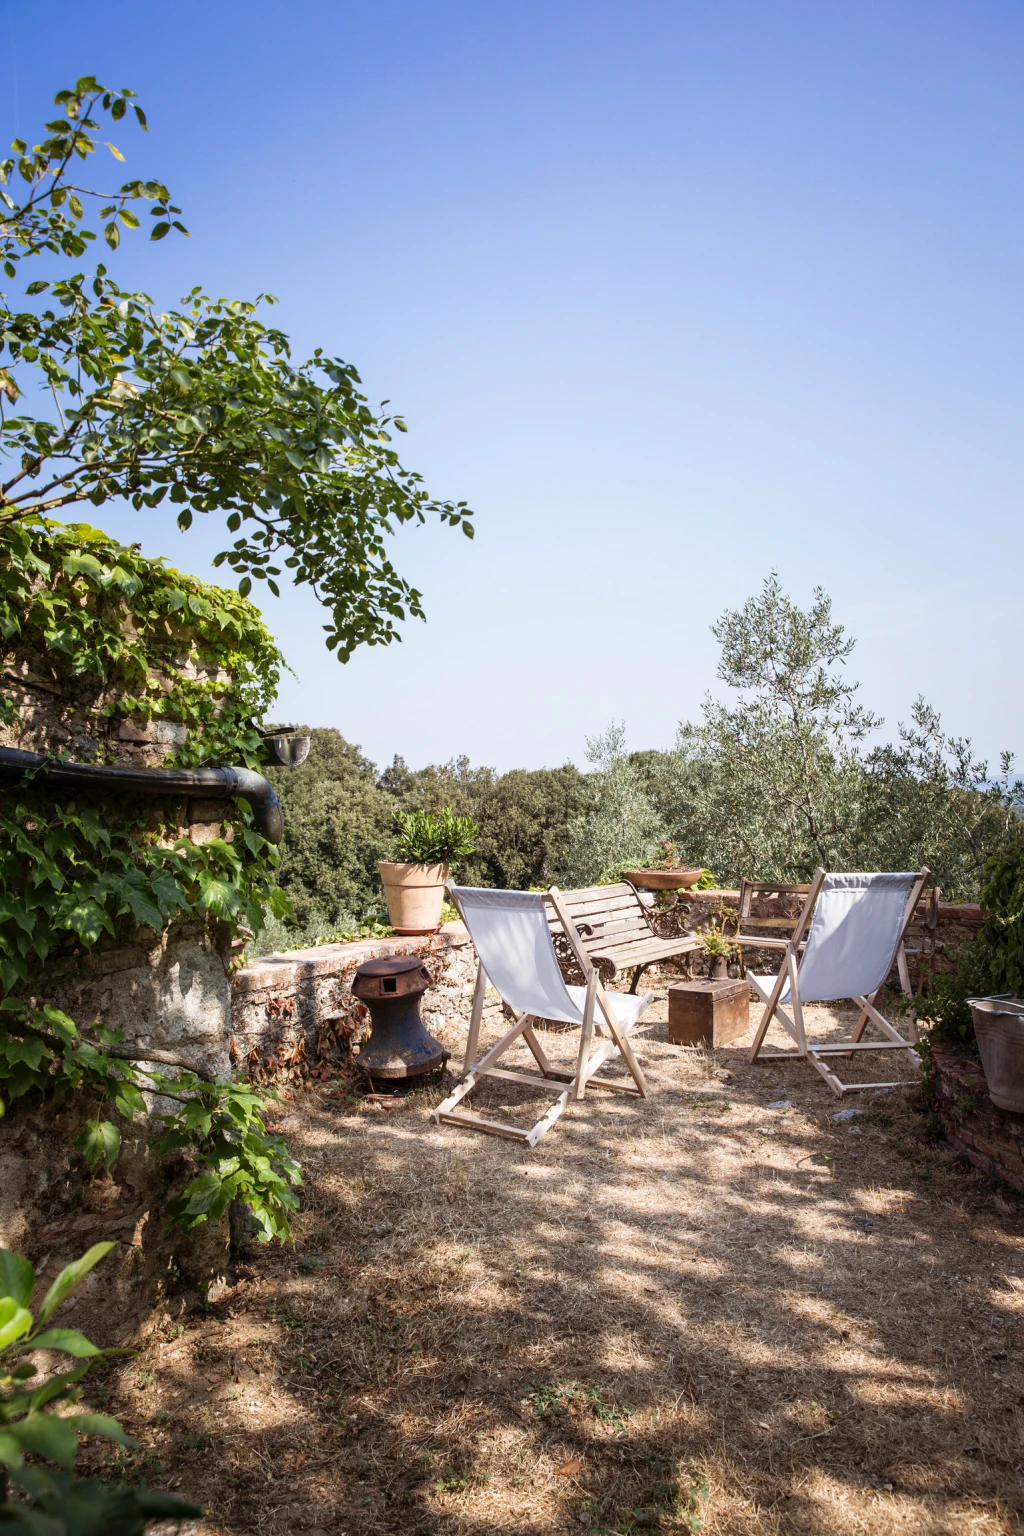 Slow living in Tuscany, Italy. Back to Nature in Luxury